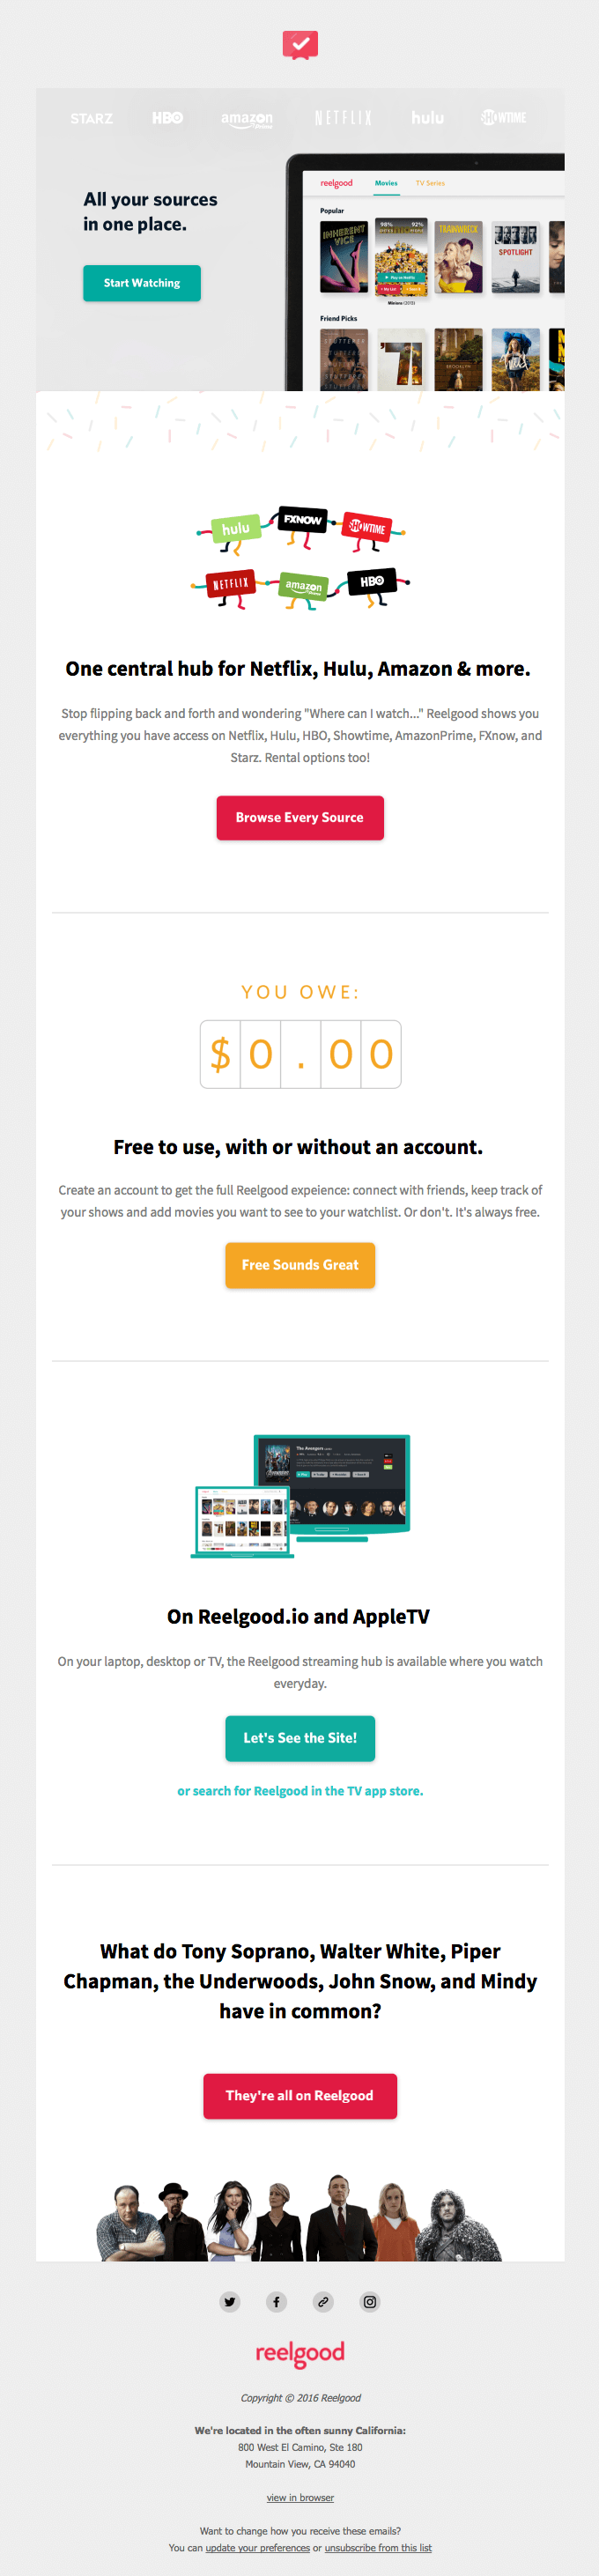 SaaS Product Launch Emails: Screenshot of Reelgood's launch email